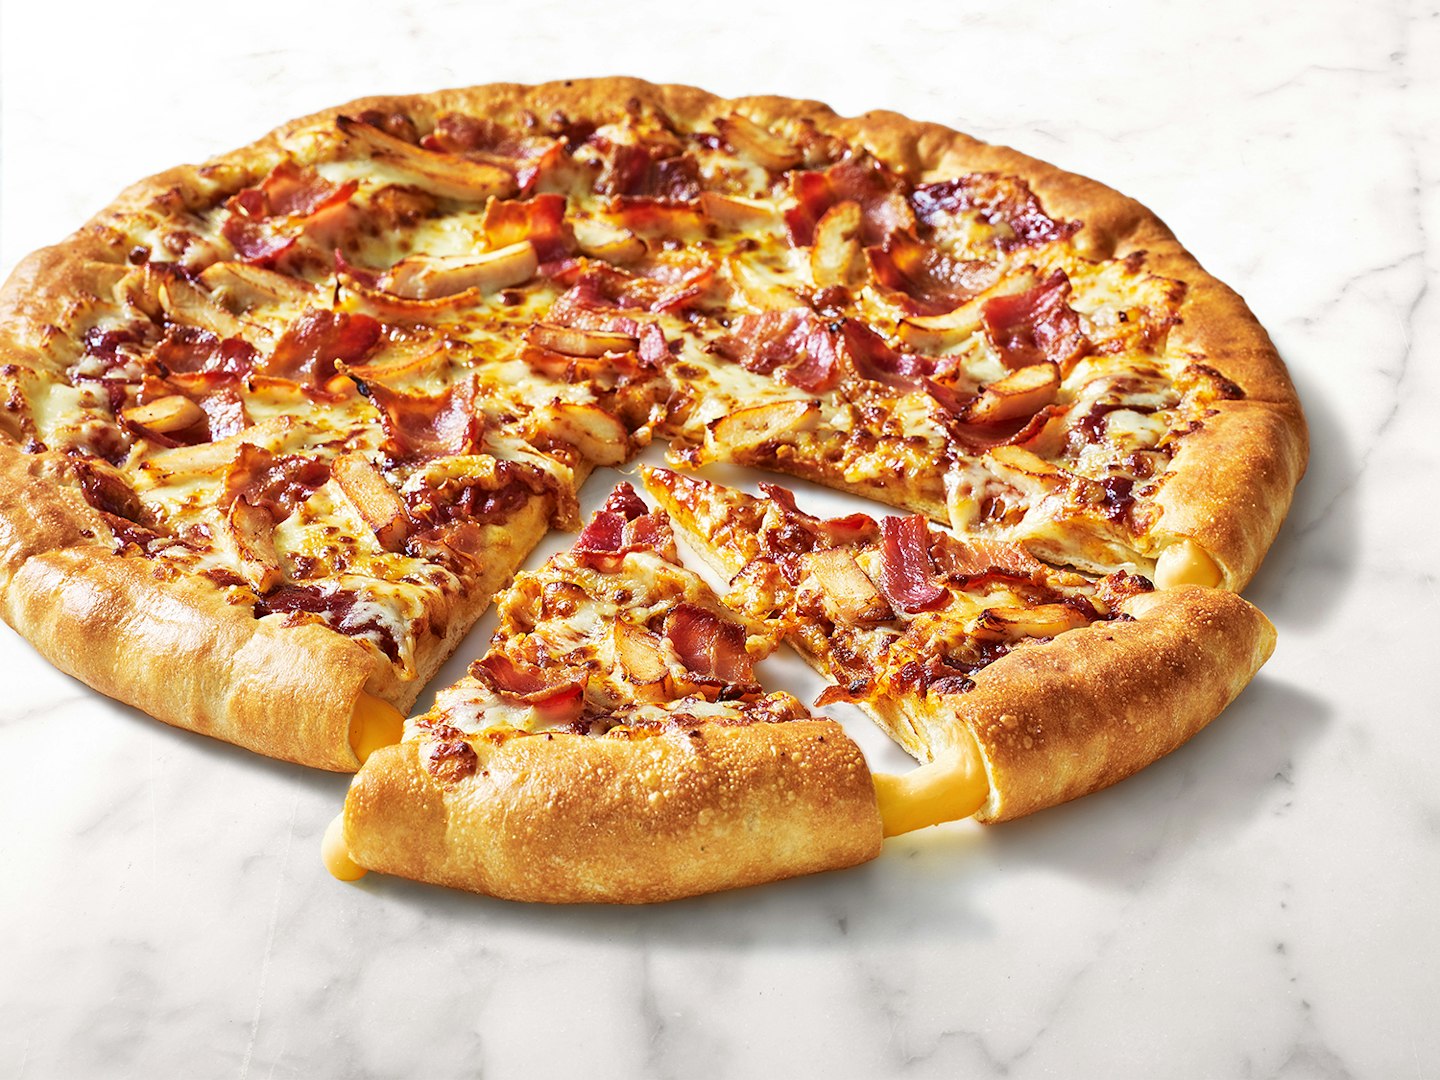 Pizza Hut Delivery launches Mexican Fiesta range with Nacho Cheese Stuffed Crust pizza